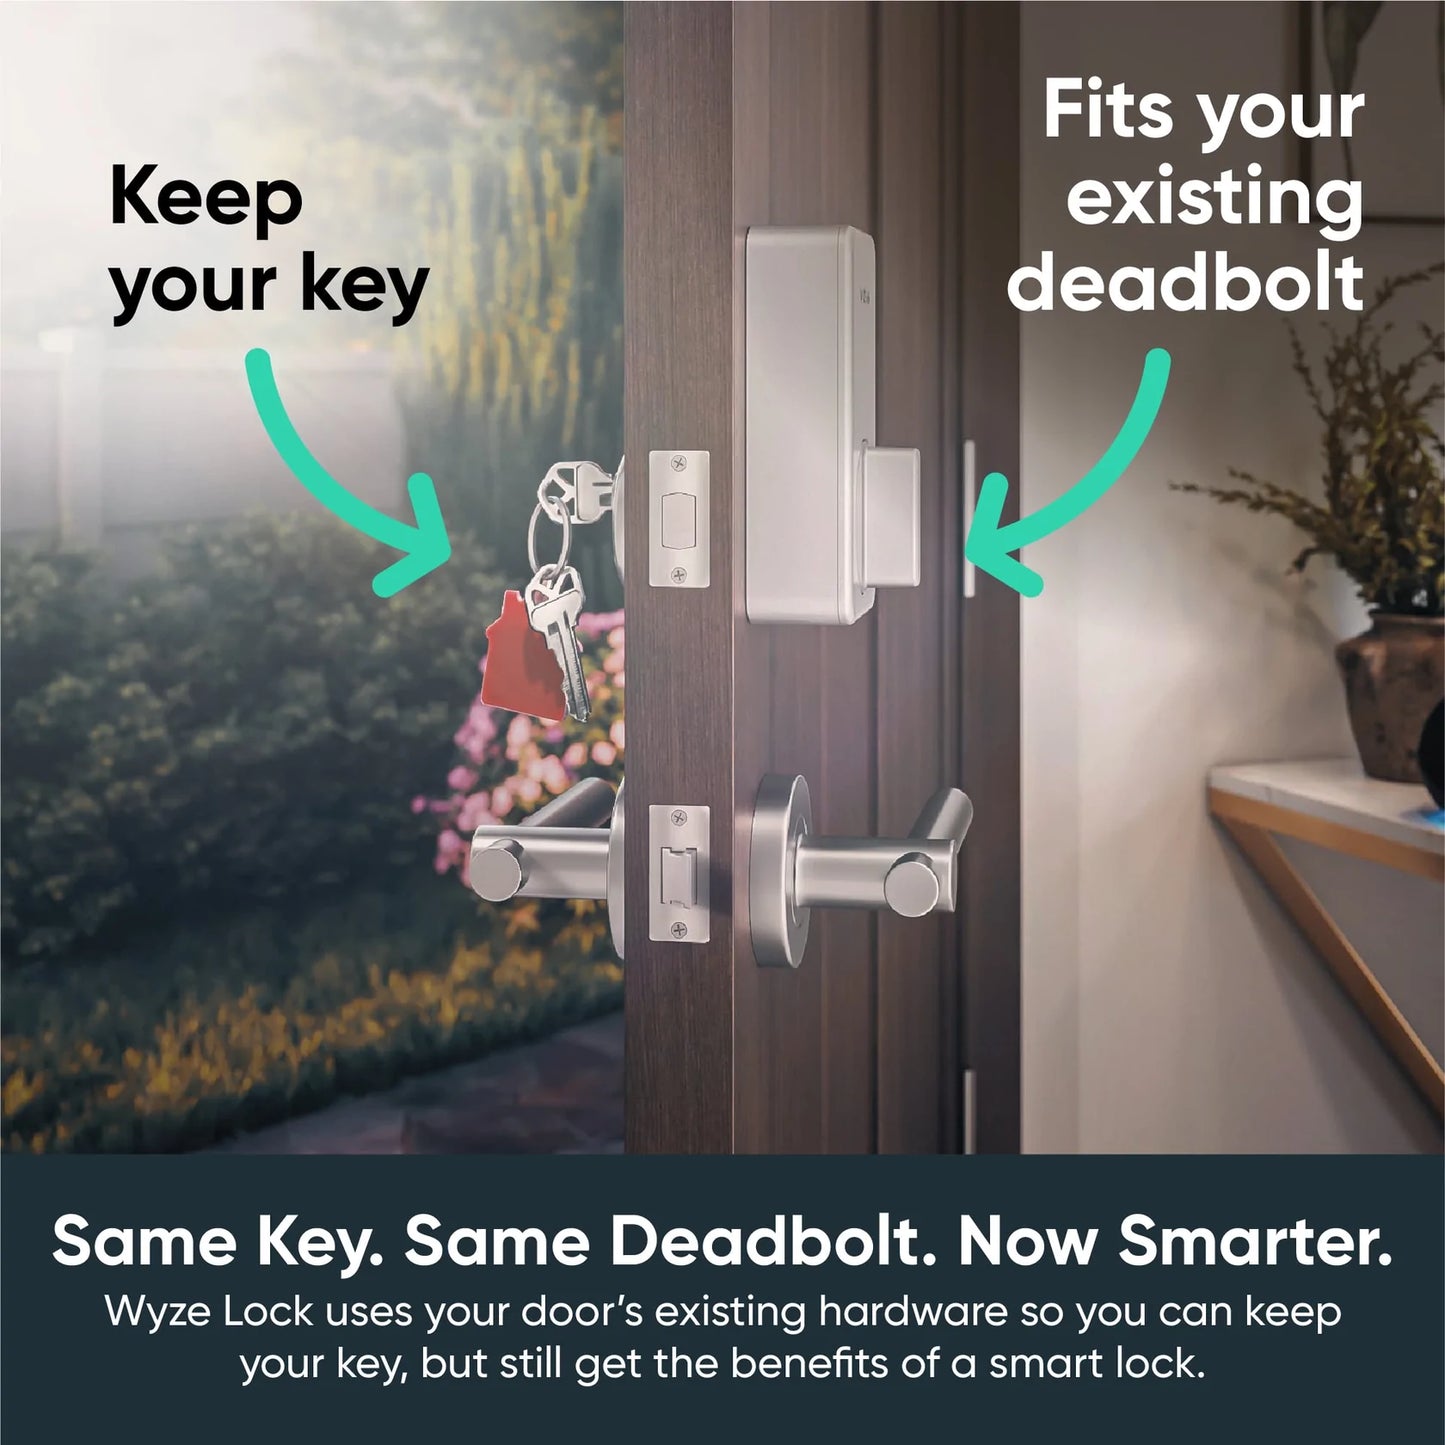 Wyze Lock installed on door that is open. Key in lock. Text overlay that says "Same Key. Same Deadbolt. Now Smarter."